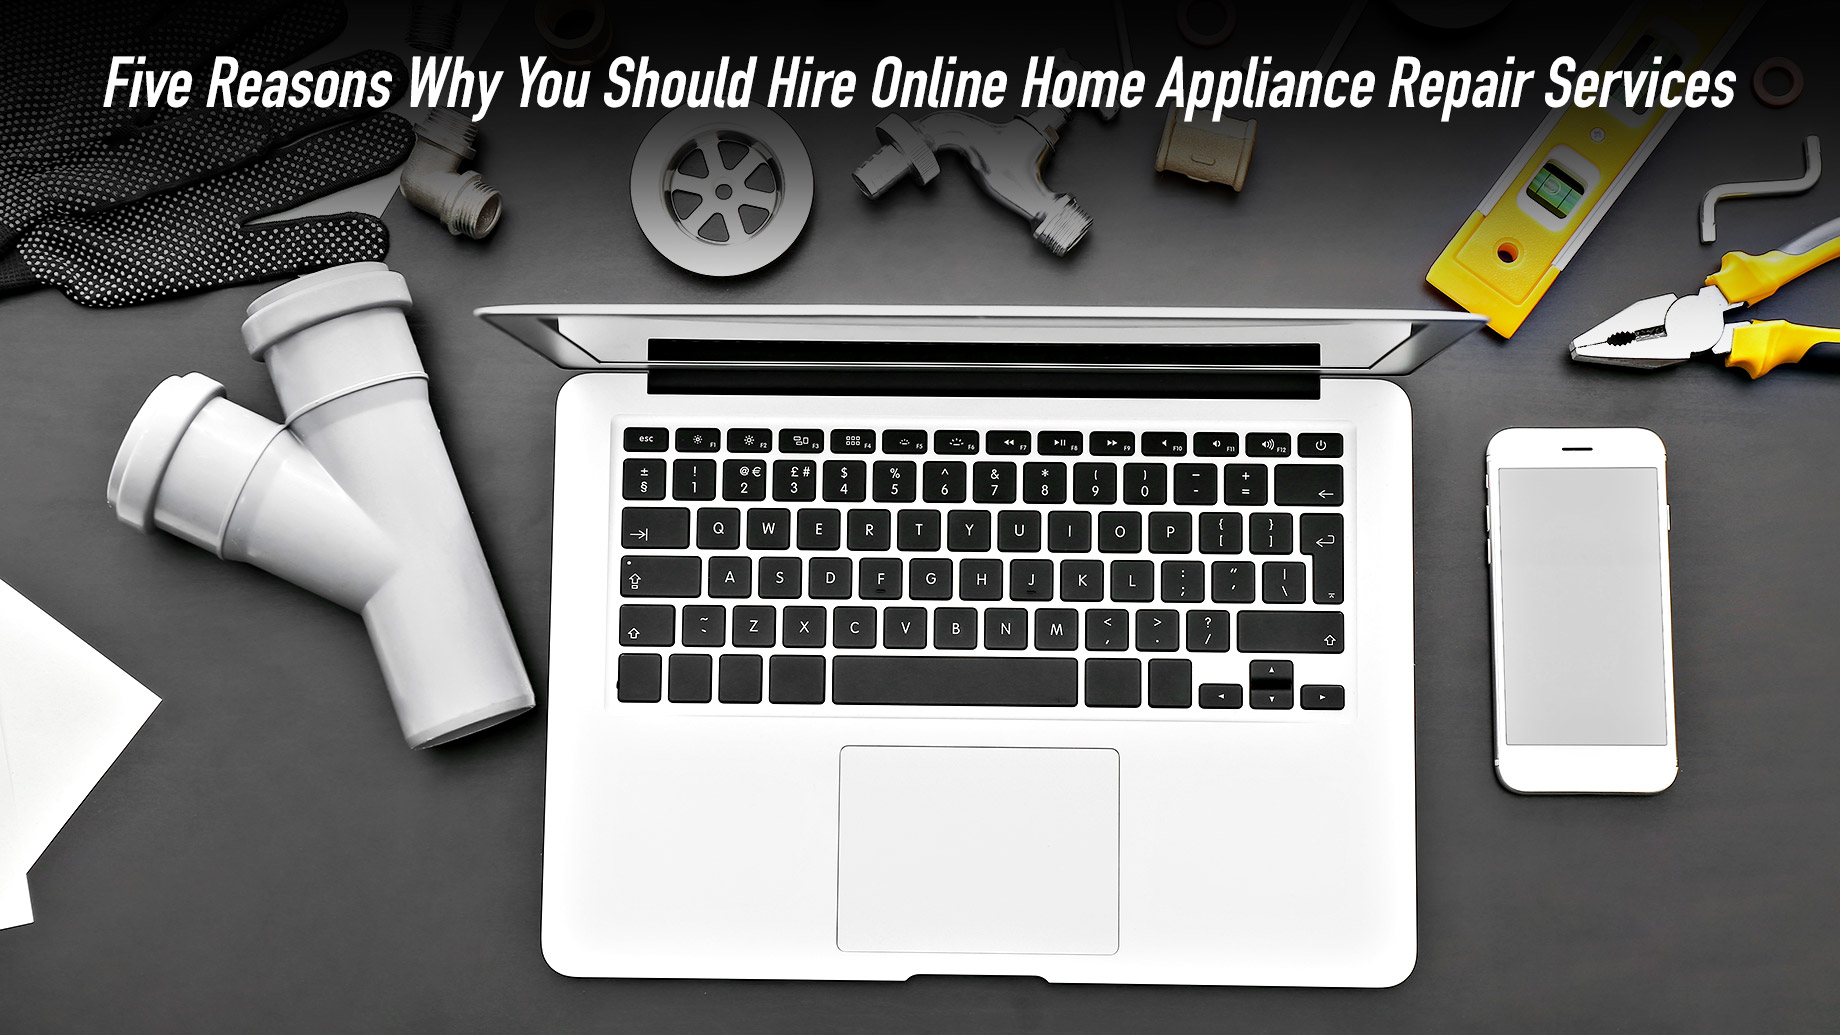 Five Reasons Why You Should Hire Online Home Appliance Repair Services